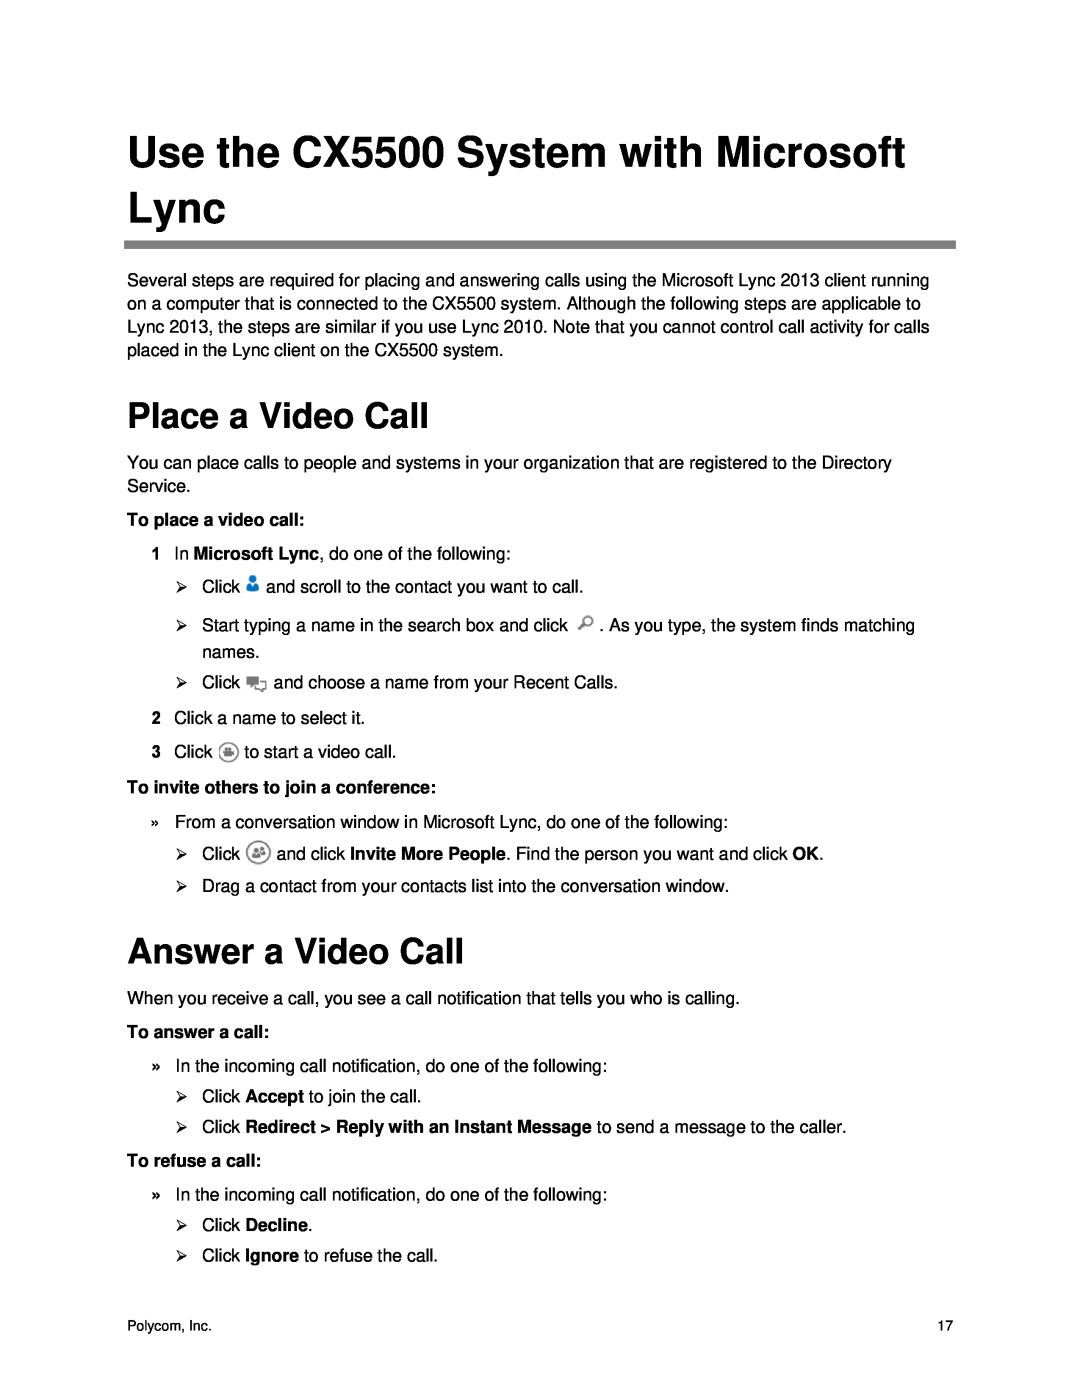 Polycom manual Use the CX5500 System with Microsoft Lync, Place a Video Call, Answer a Video Call, To place a video call 